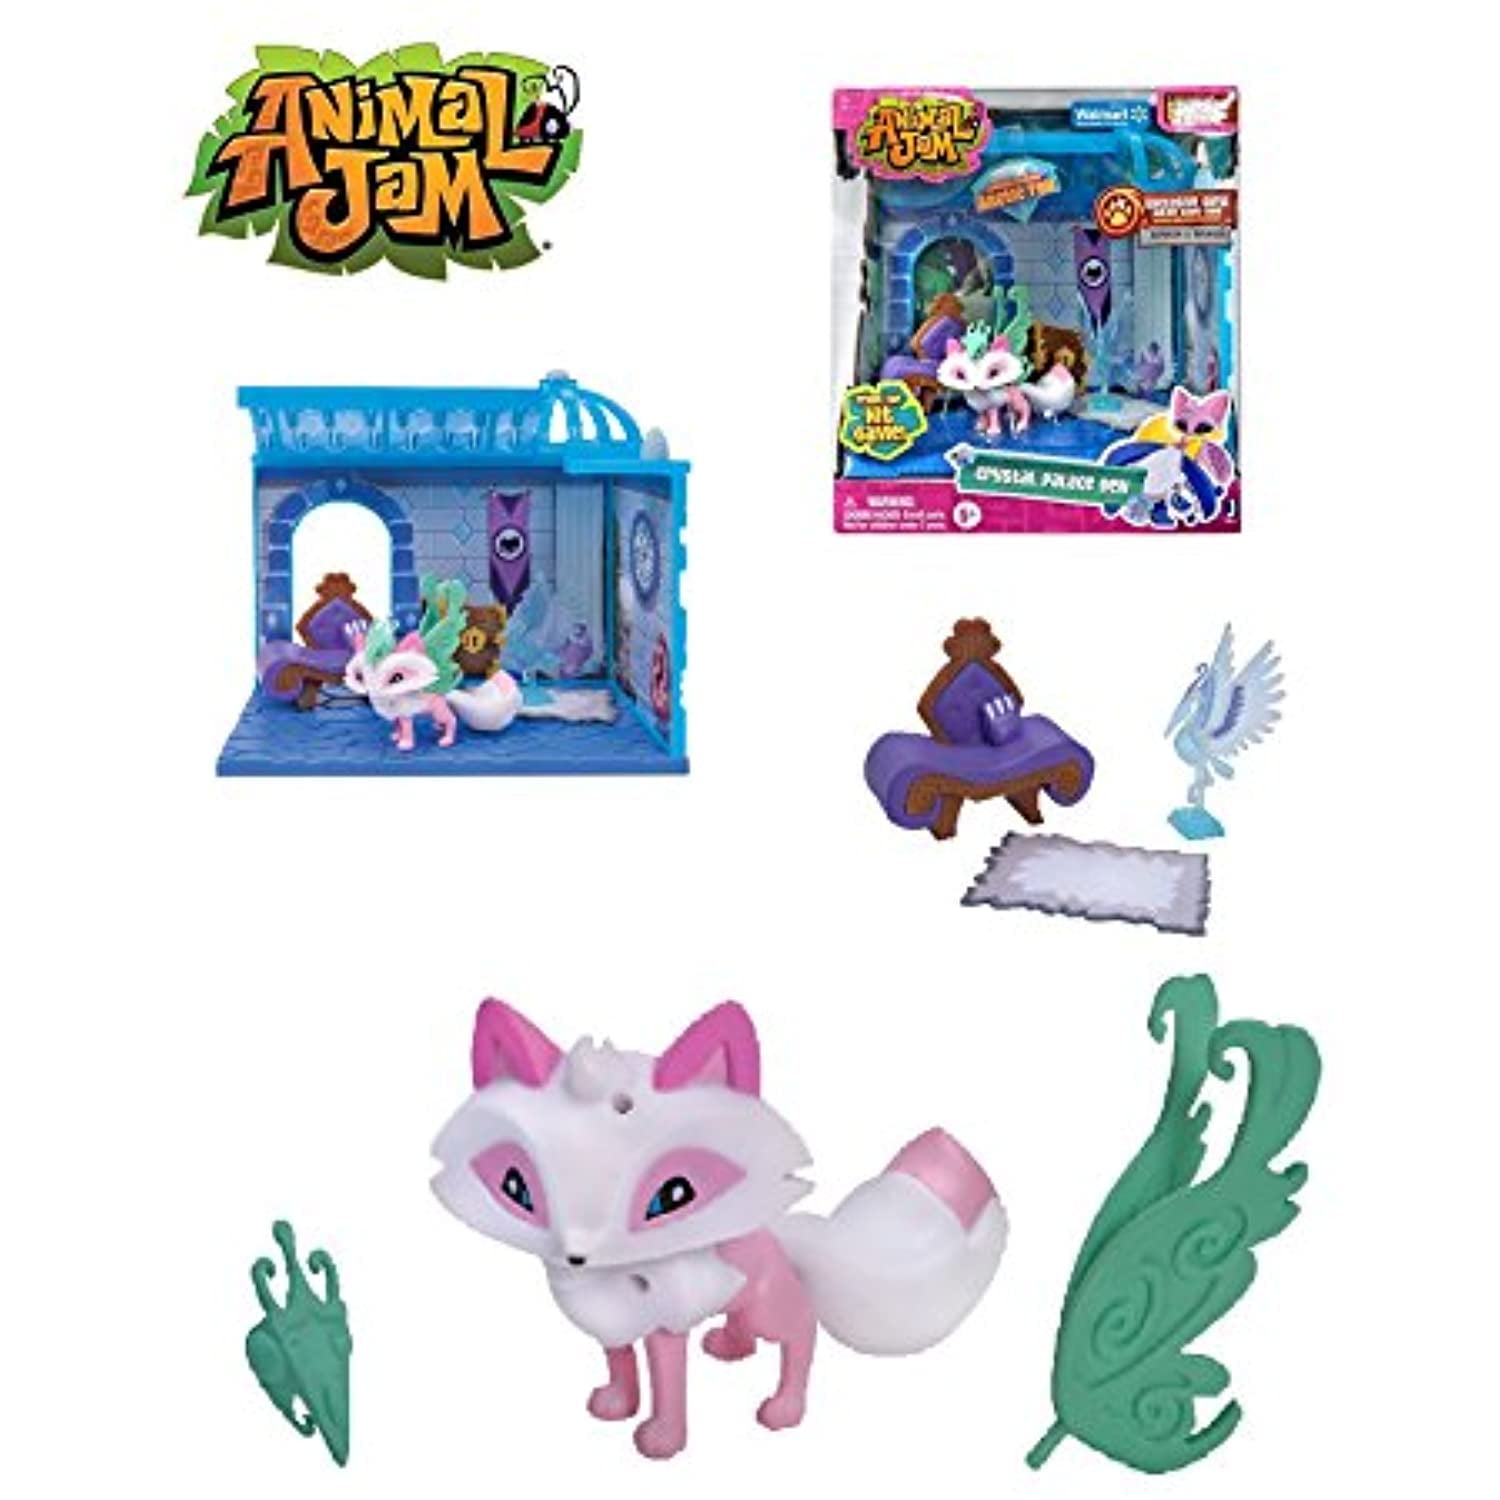 2016 Animal Jam Crystal Palace Den Limited Edition Arctic Fox Walmart for sale online 